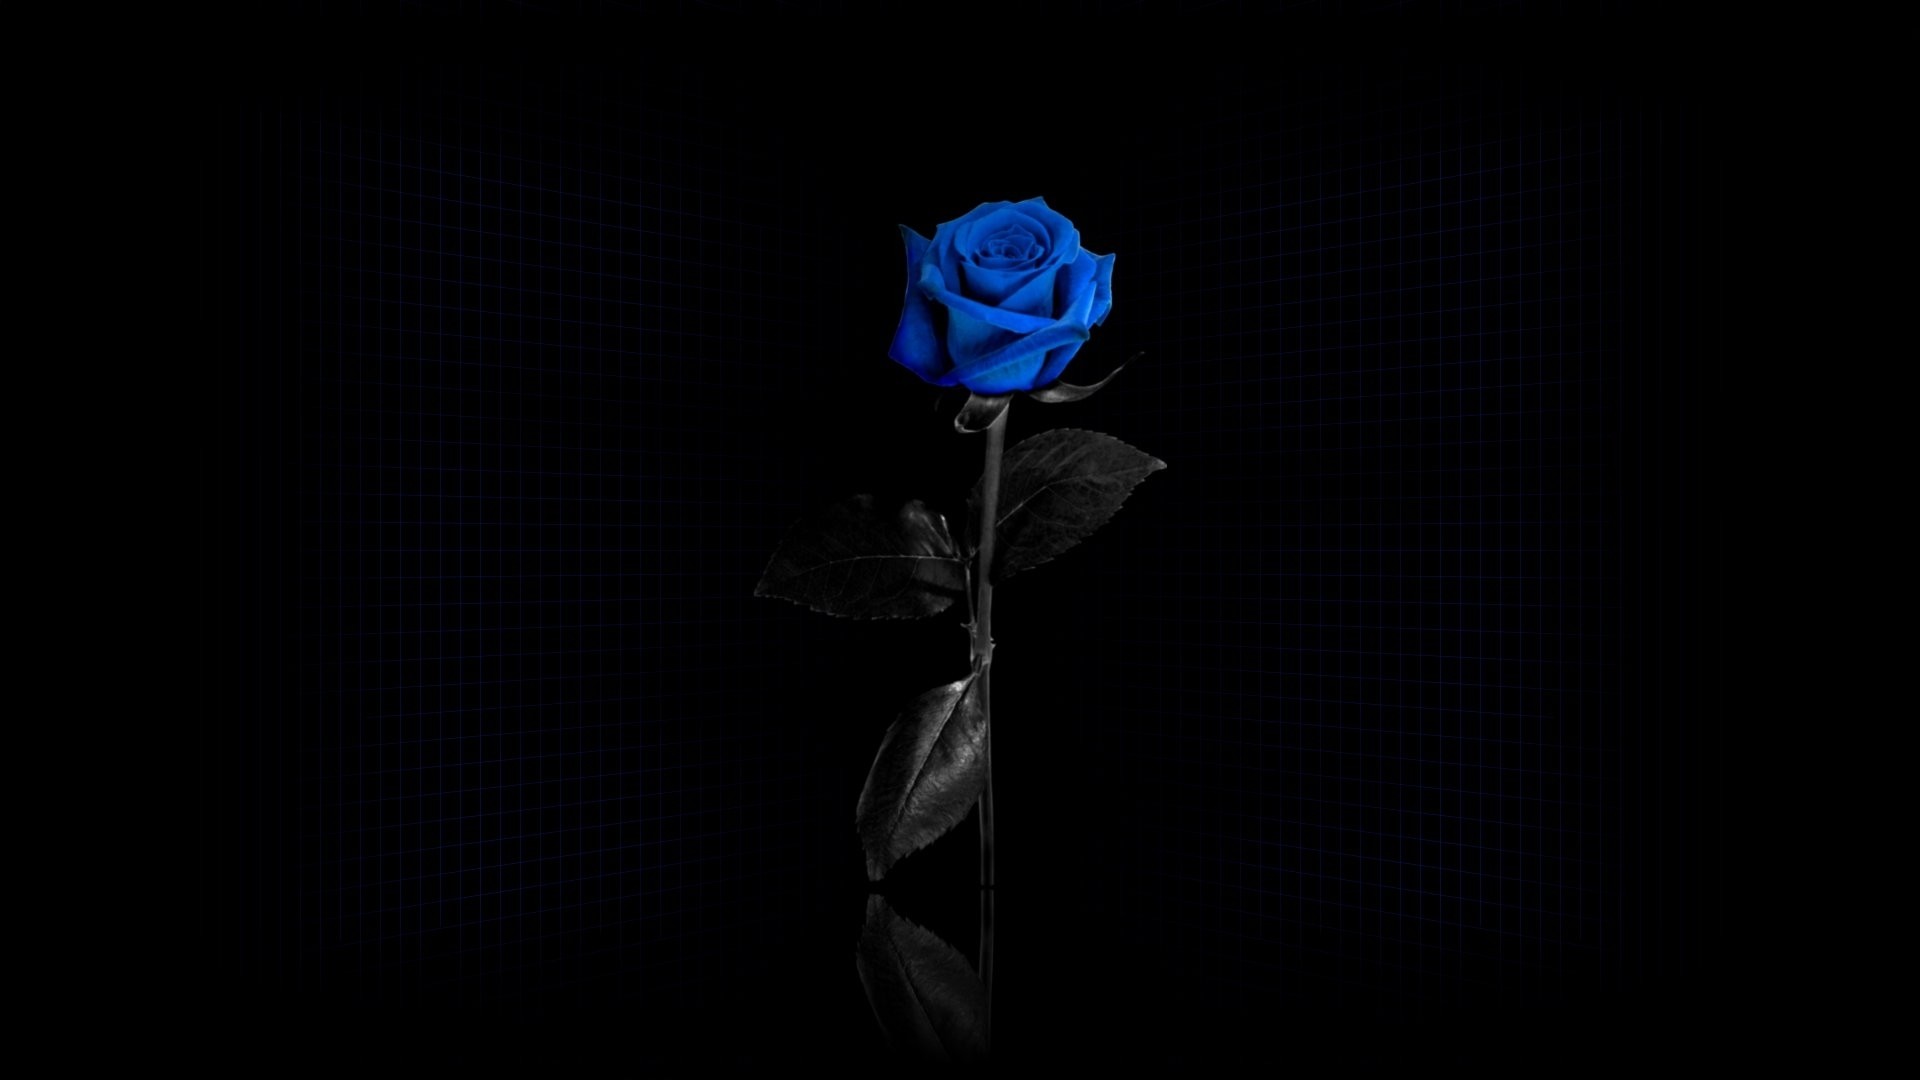 1920x1080 Beautiful blue rose on black background wallpapers and images .